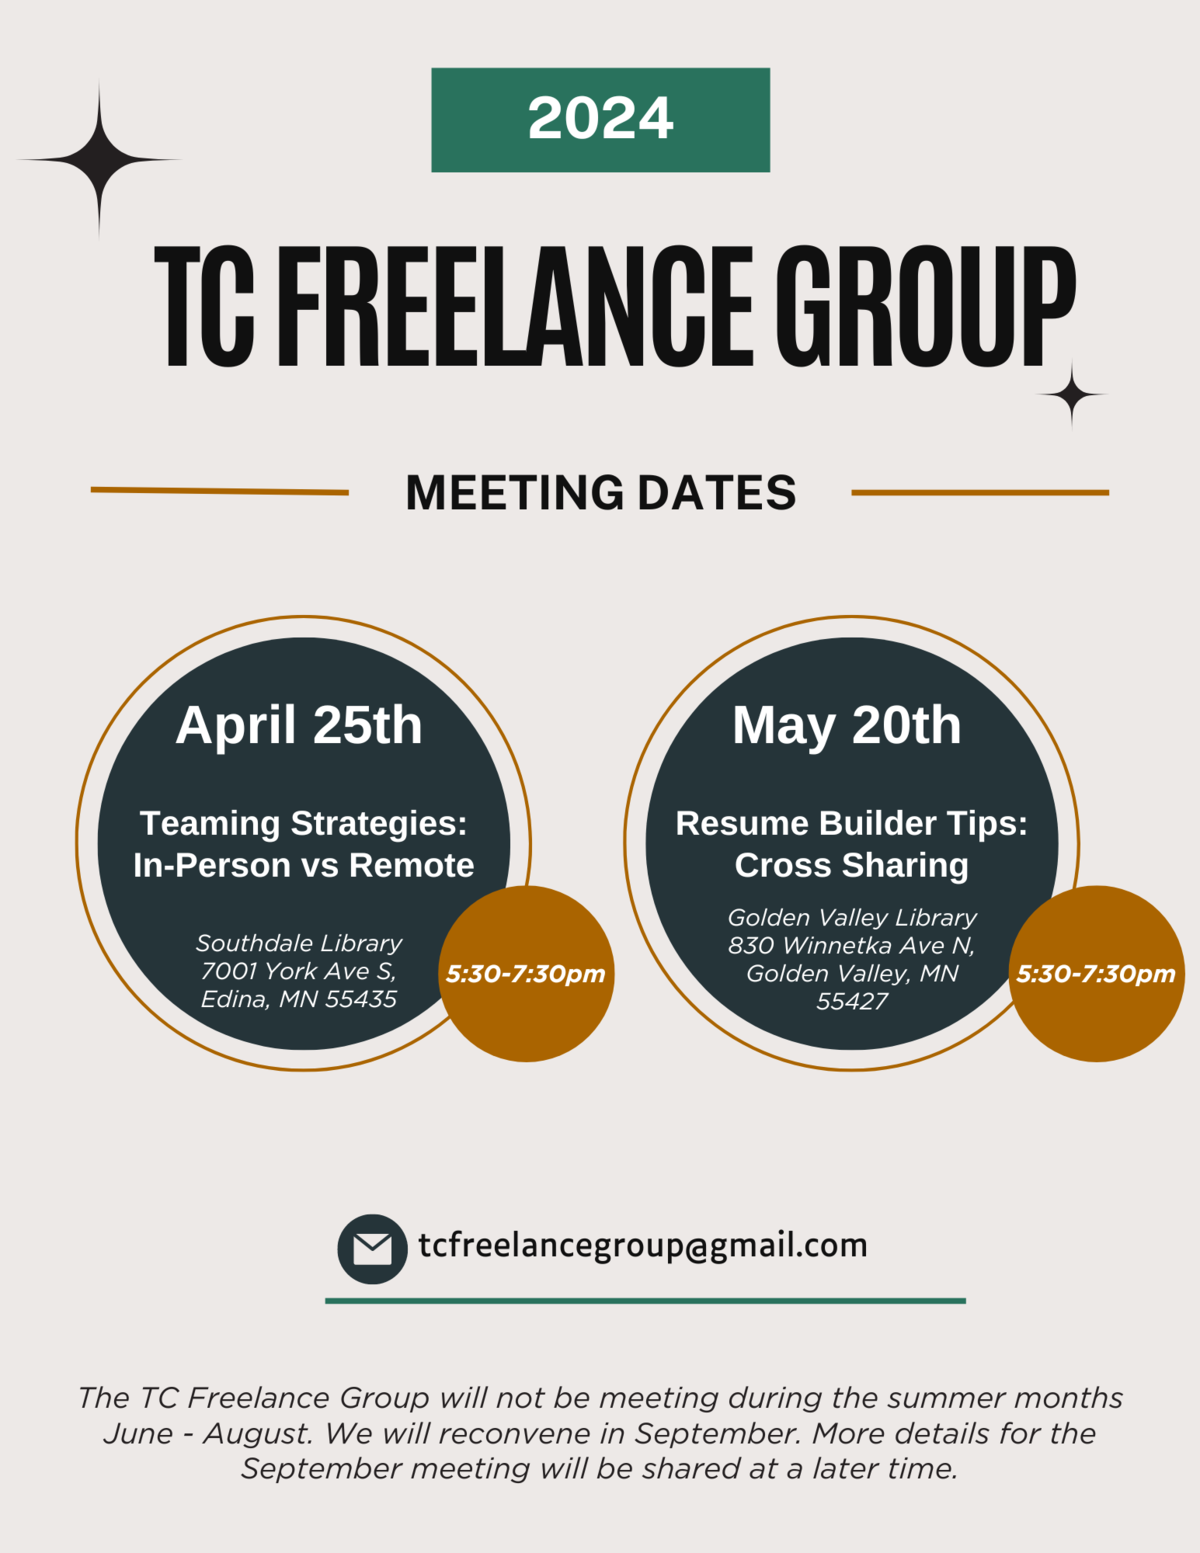 2024 TC Freelance Group Meeting Dates. April 25th Teaming Strategies: In-Person vs Remote from 5:30-7:30pm at Southdale Library 7001 York Ave S., Edina, MN 55435.  May 20th Resume Builder Tips: Cross Sharing from 5:30-7:30pm at the Golden Valley Library 830 Winnetka Ave N., Golden Valley, MN 55427. The TC Freelance Group will not be meeting during the summer months June - August. We will reconvene in September. More details for the September meeting will be shared at a later time.  